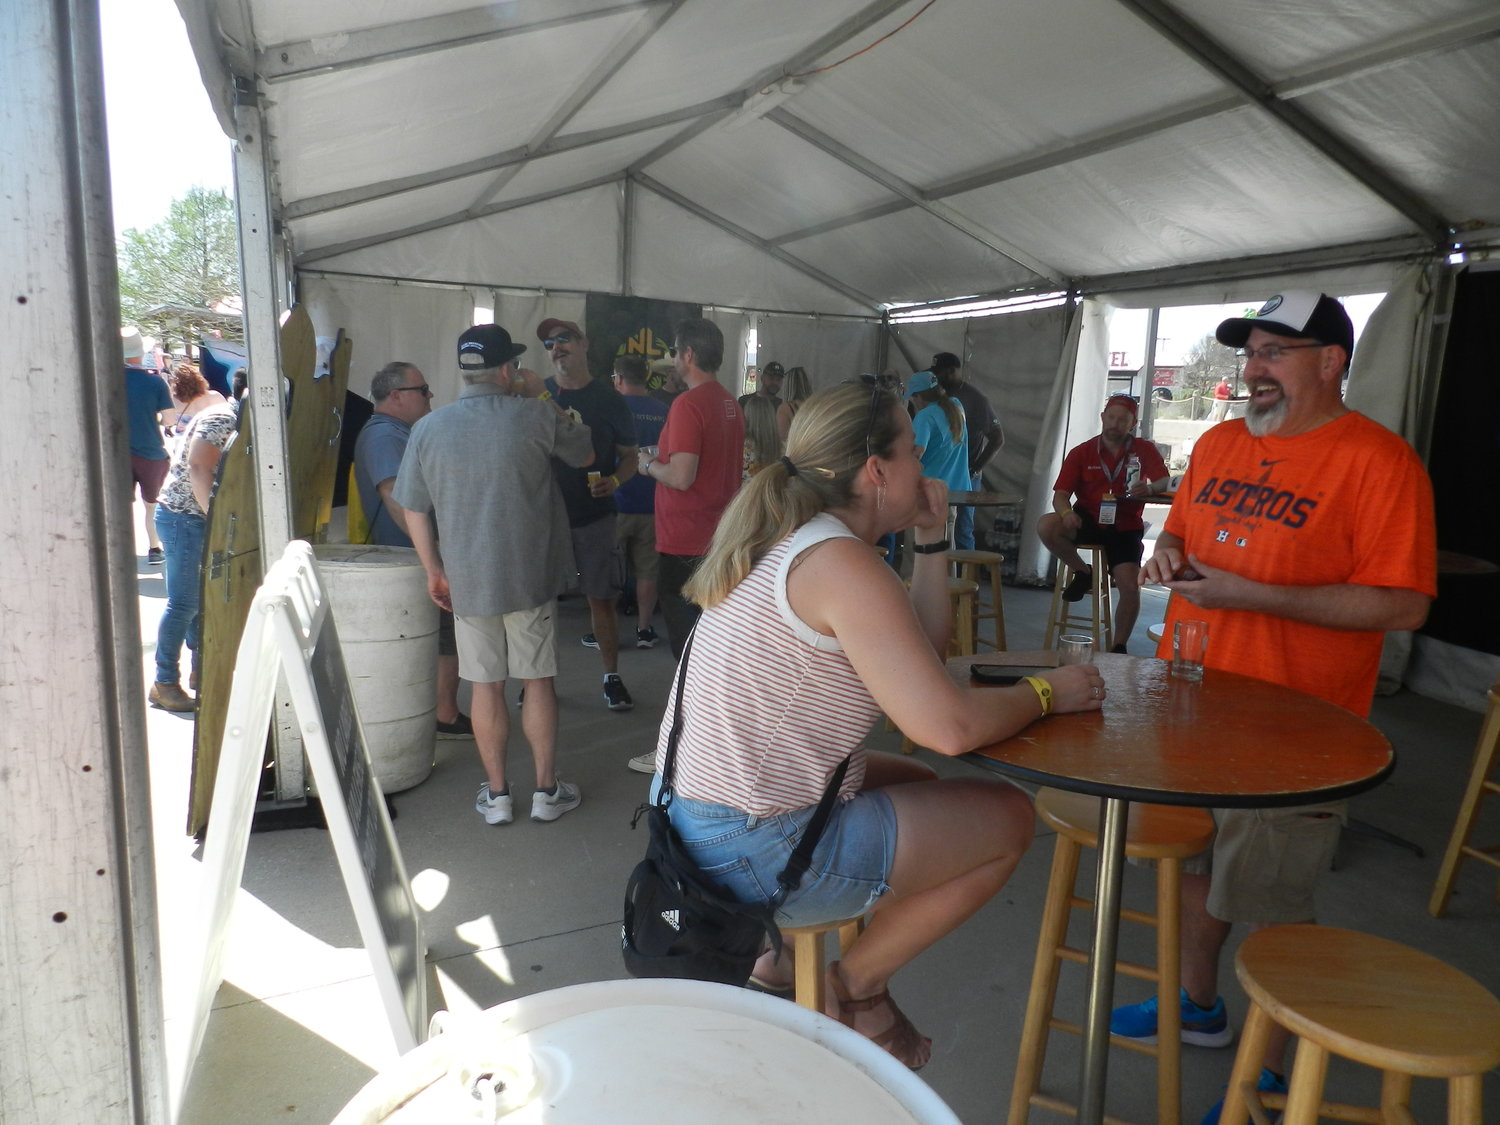 Warm weather and cold beverages made for a good time for those attending the Wild West Brew Fest at Typhoon Texas.